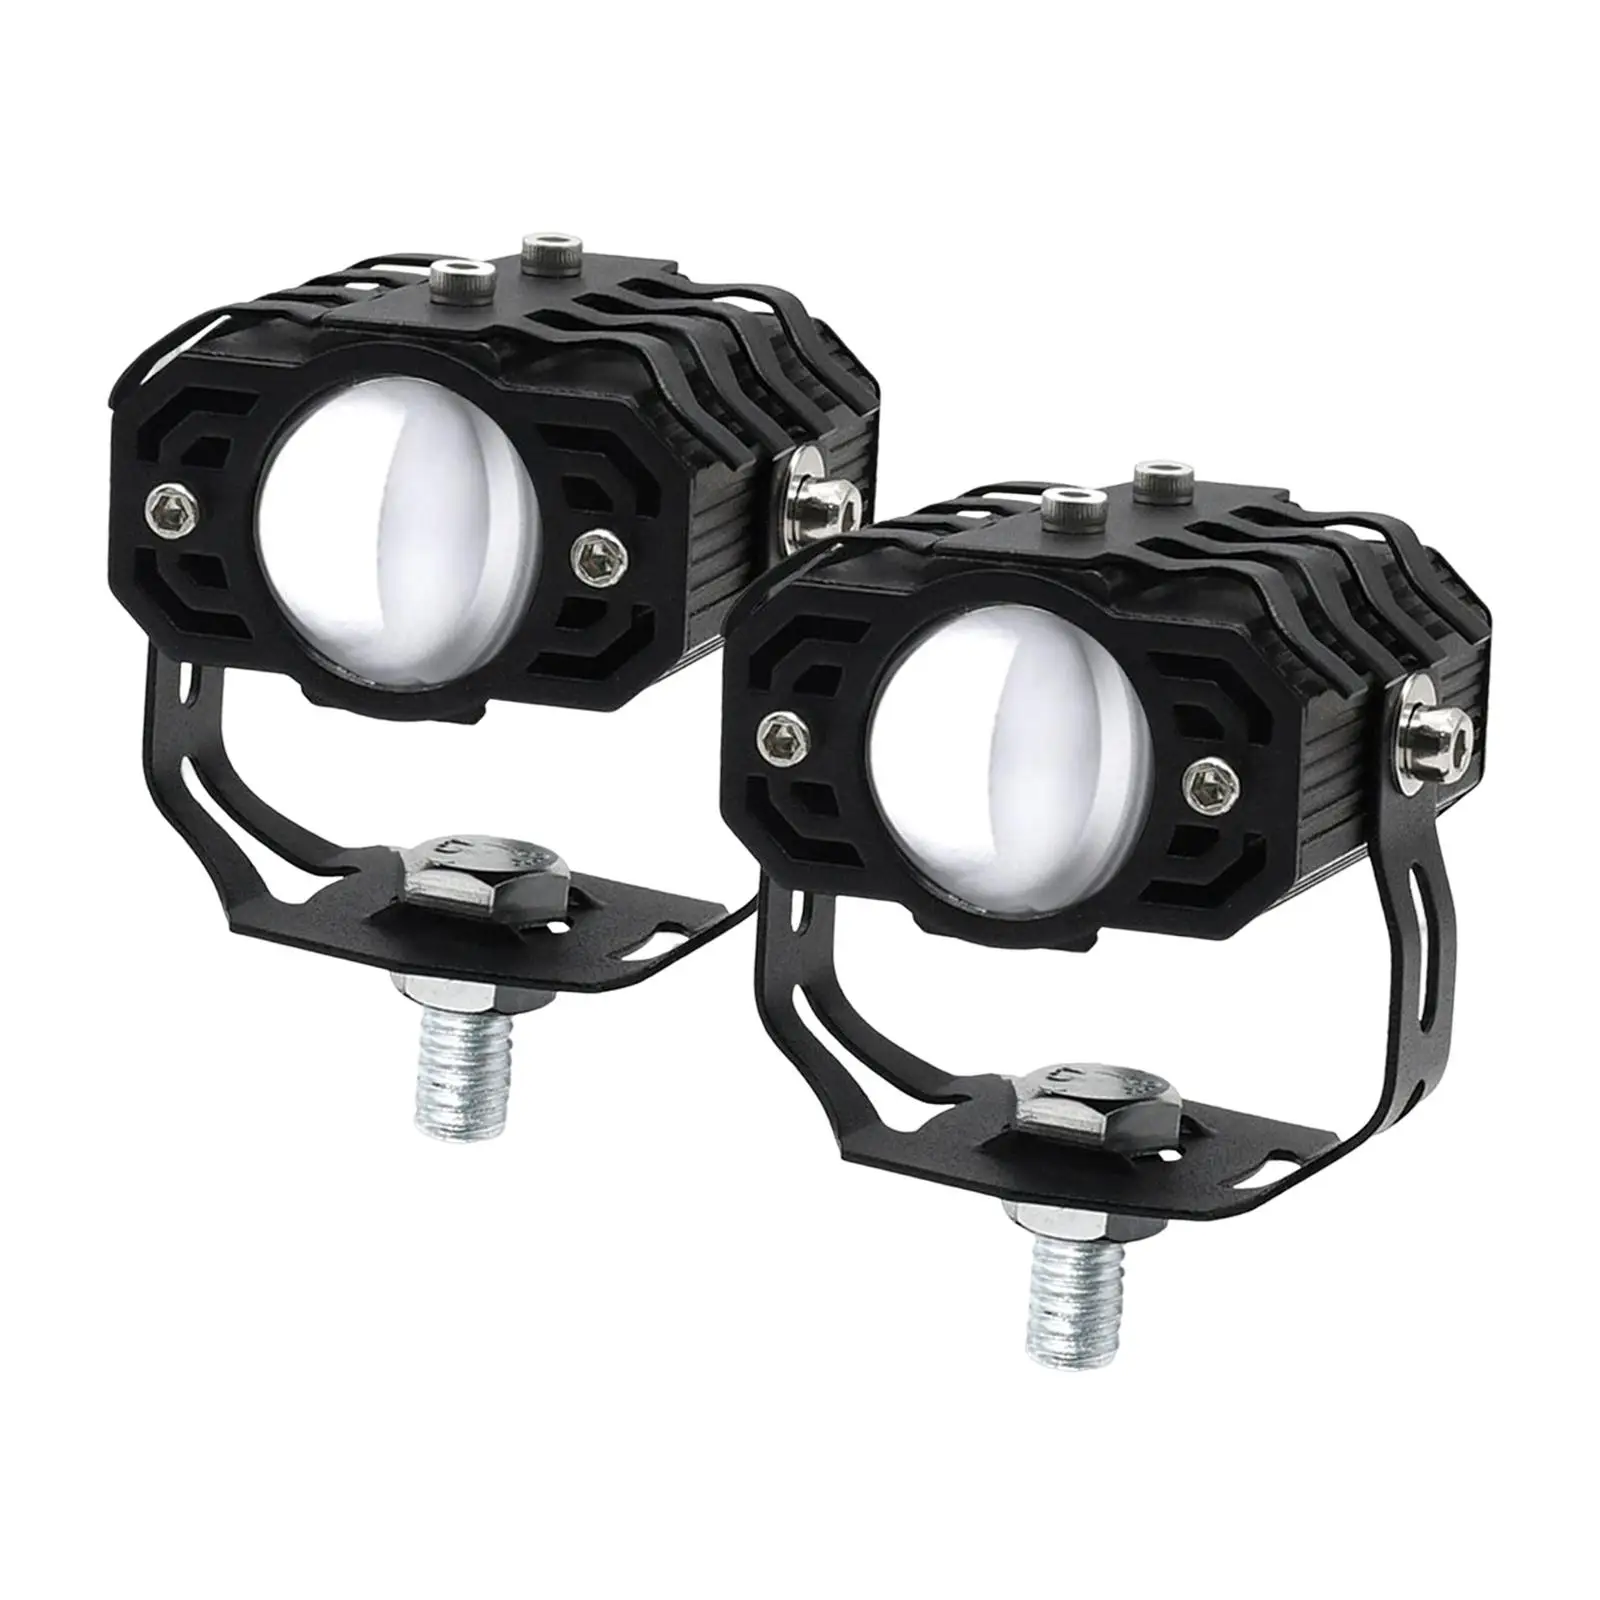 2x Motorcycle Auxiliary Driving Lights Spotlight Universal for Boat